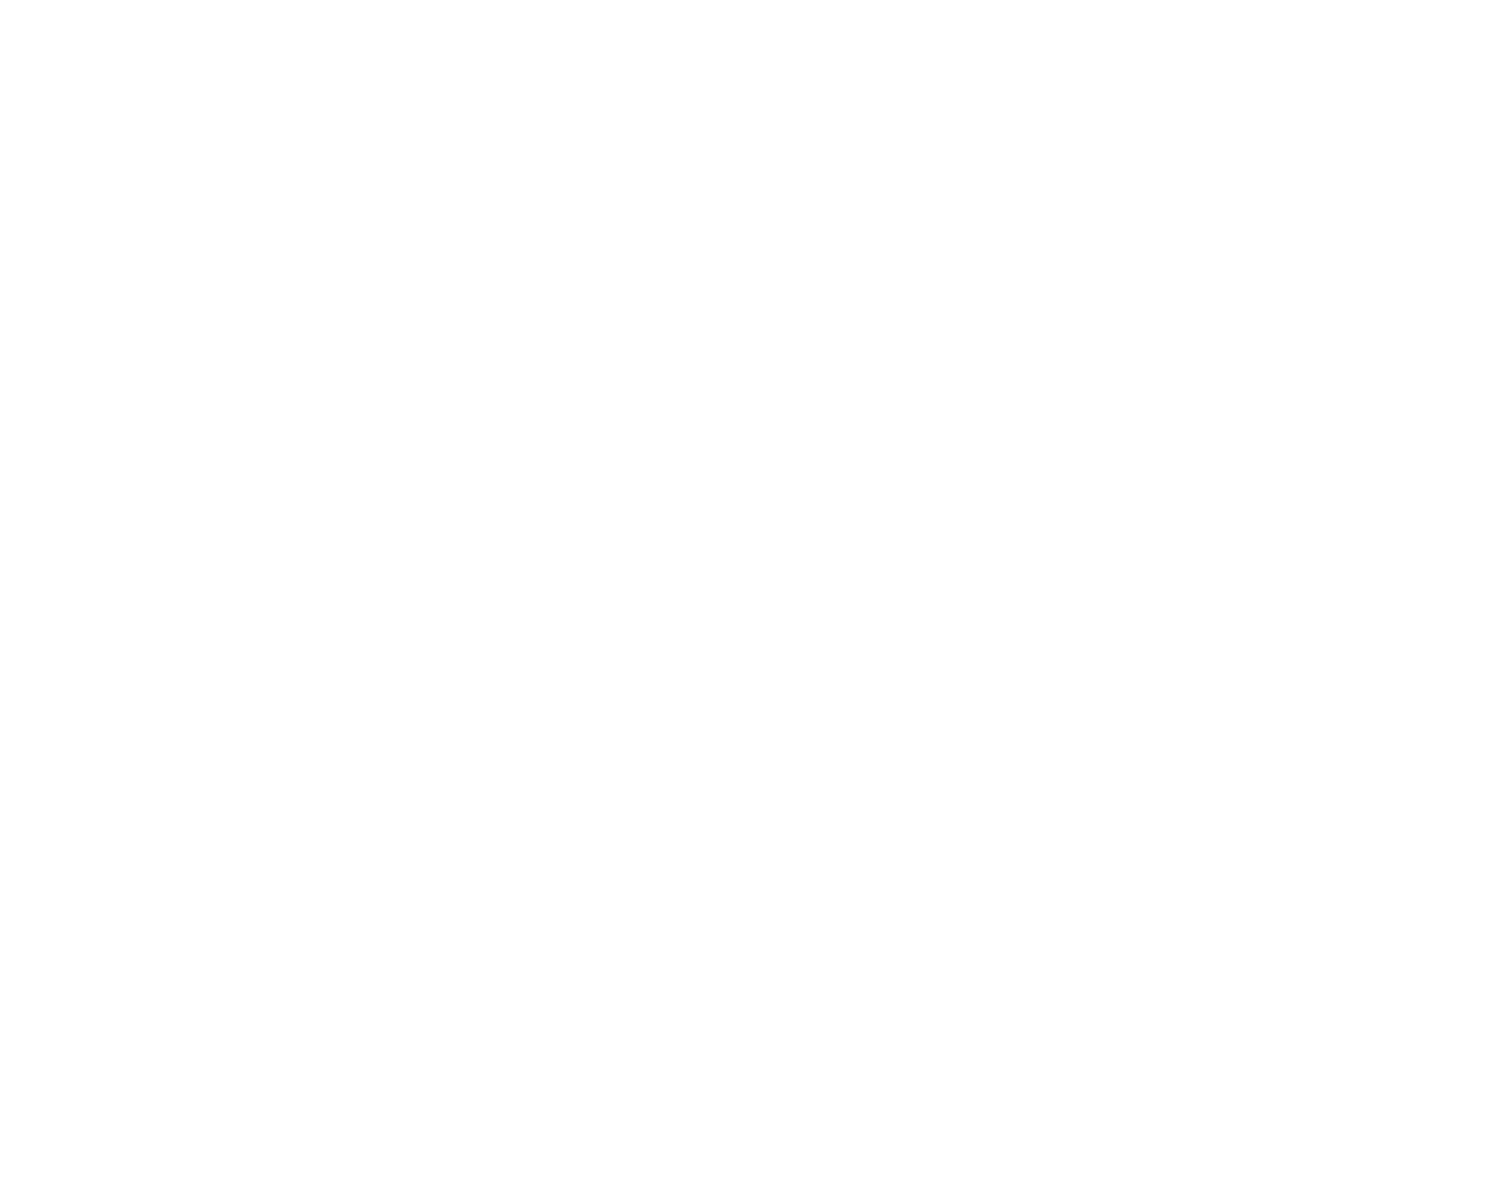 Odyssey Resilience